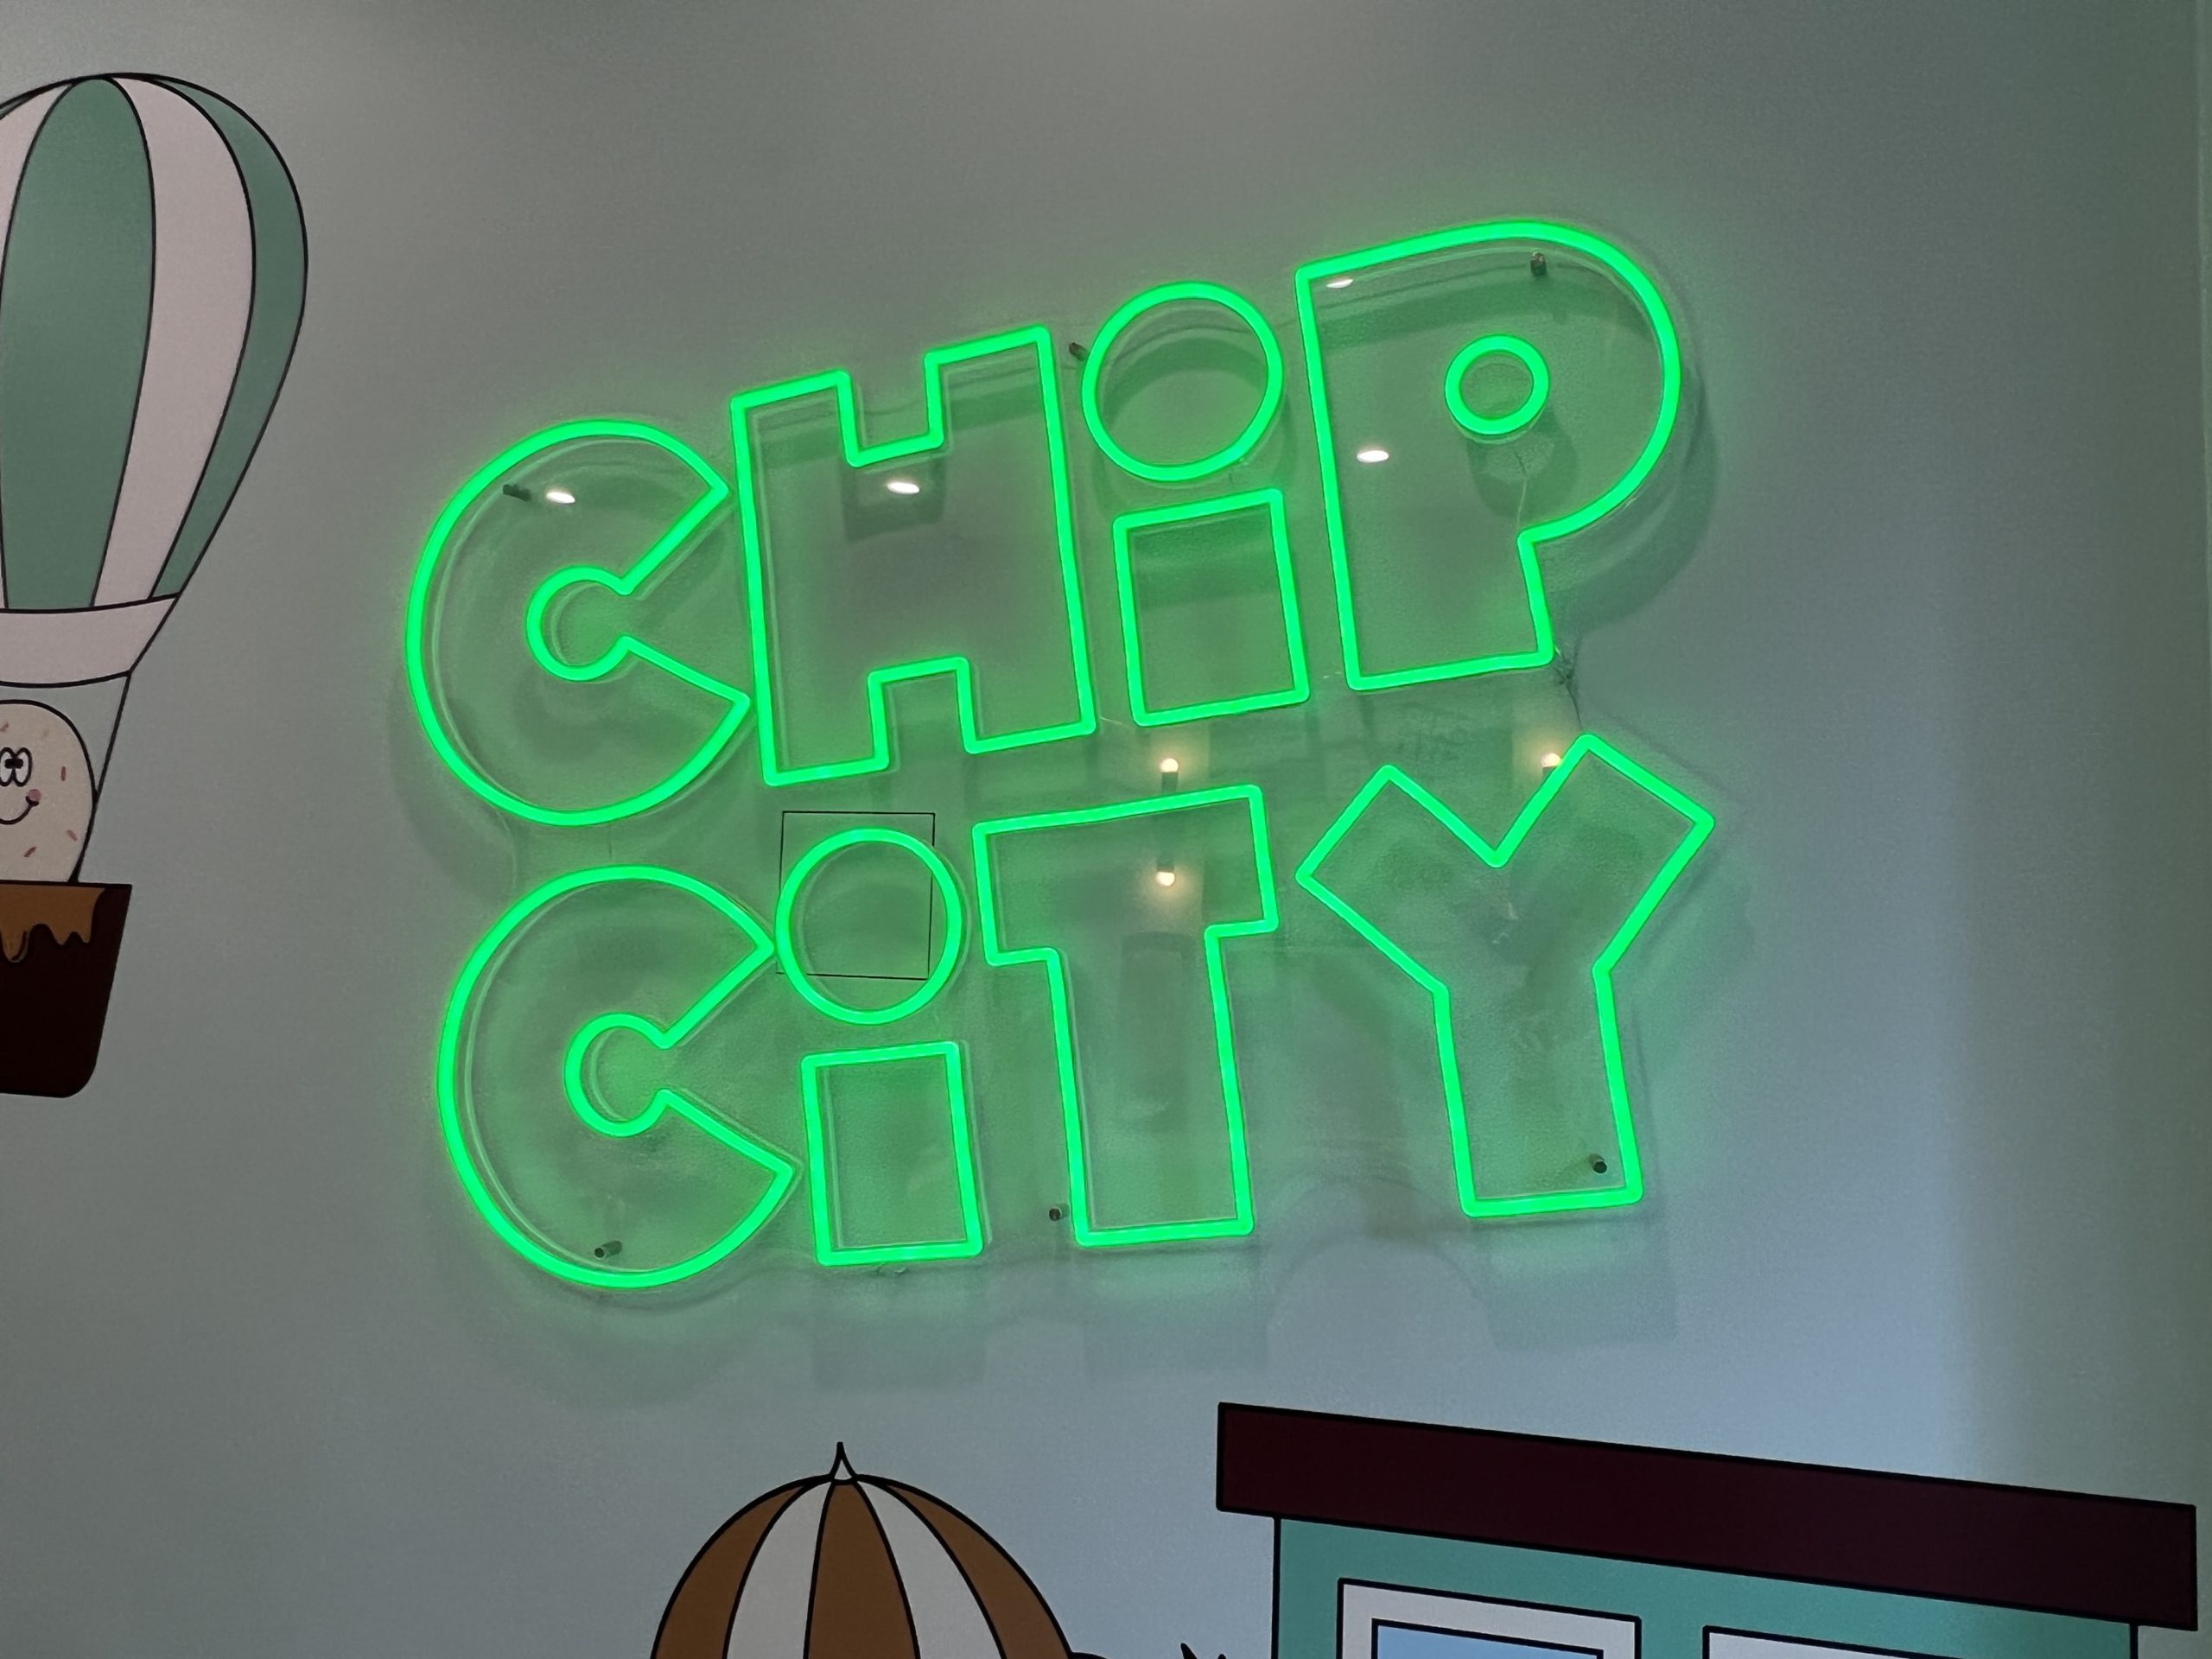 Inside Chip City's new UES cookie shop/Upper East Site